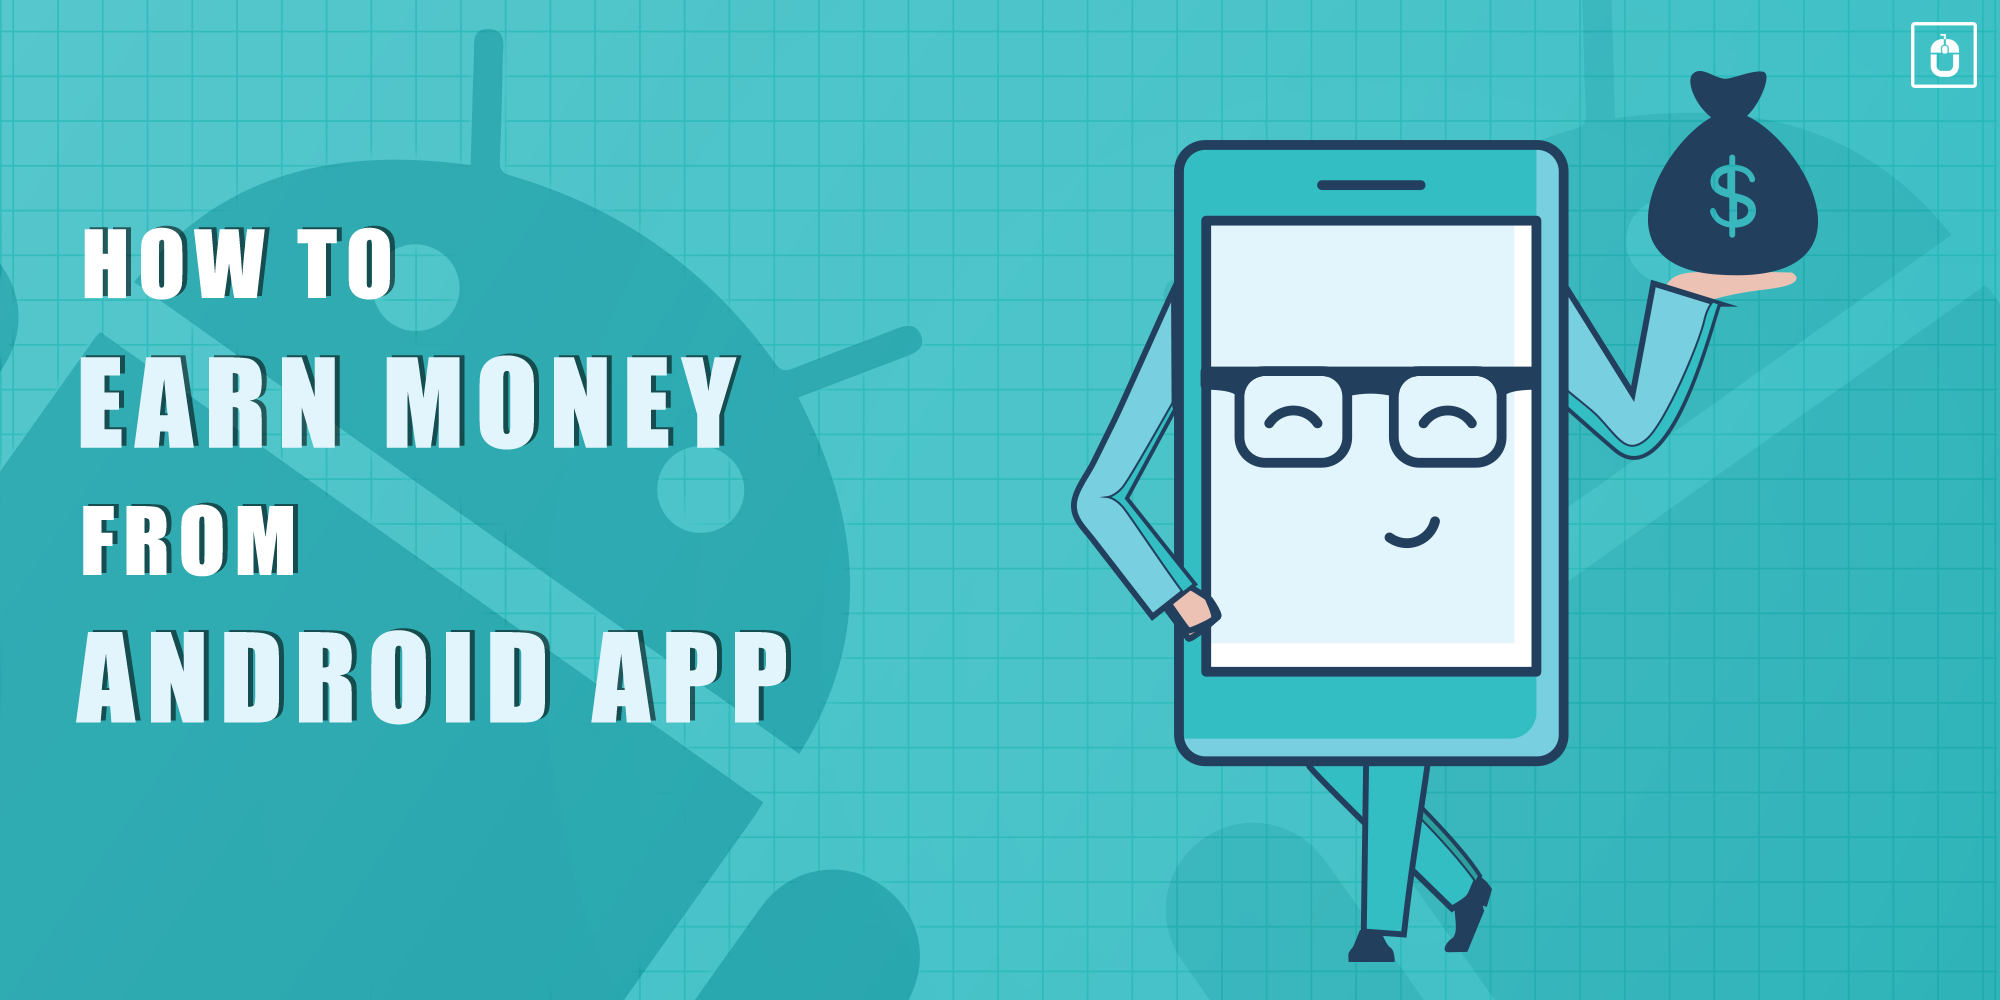 HOW TO EARN MONEY FROM ANDROID APP